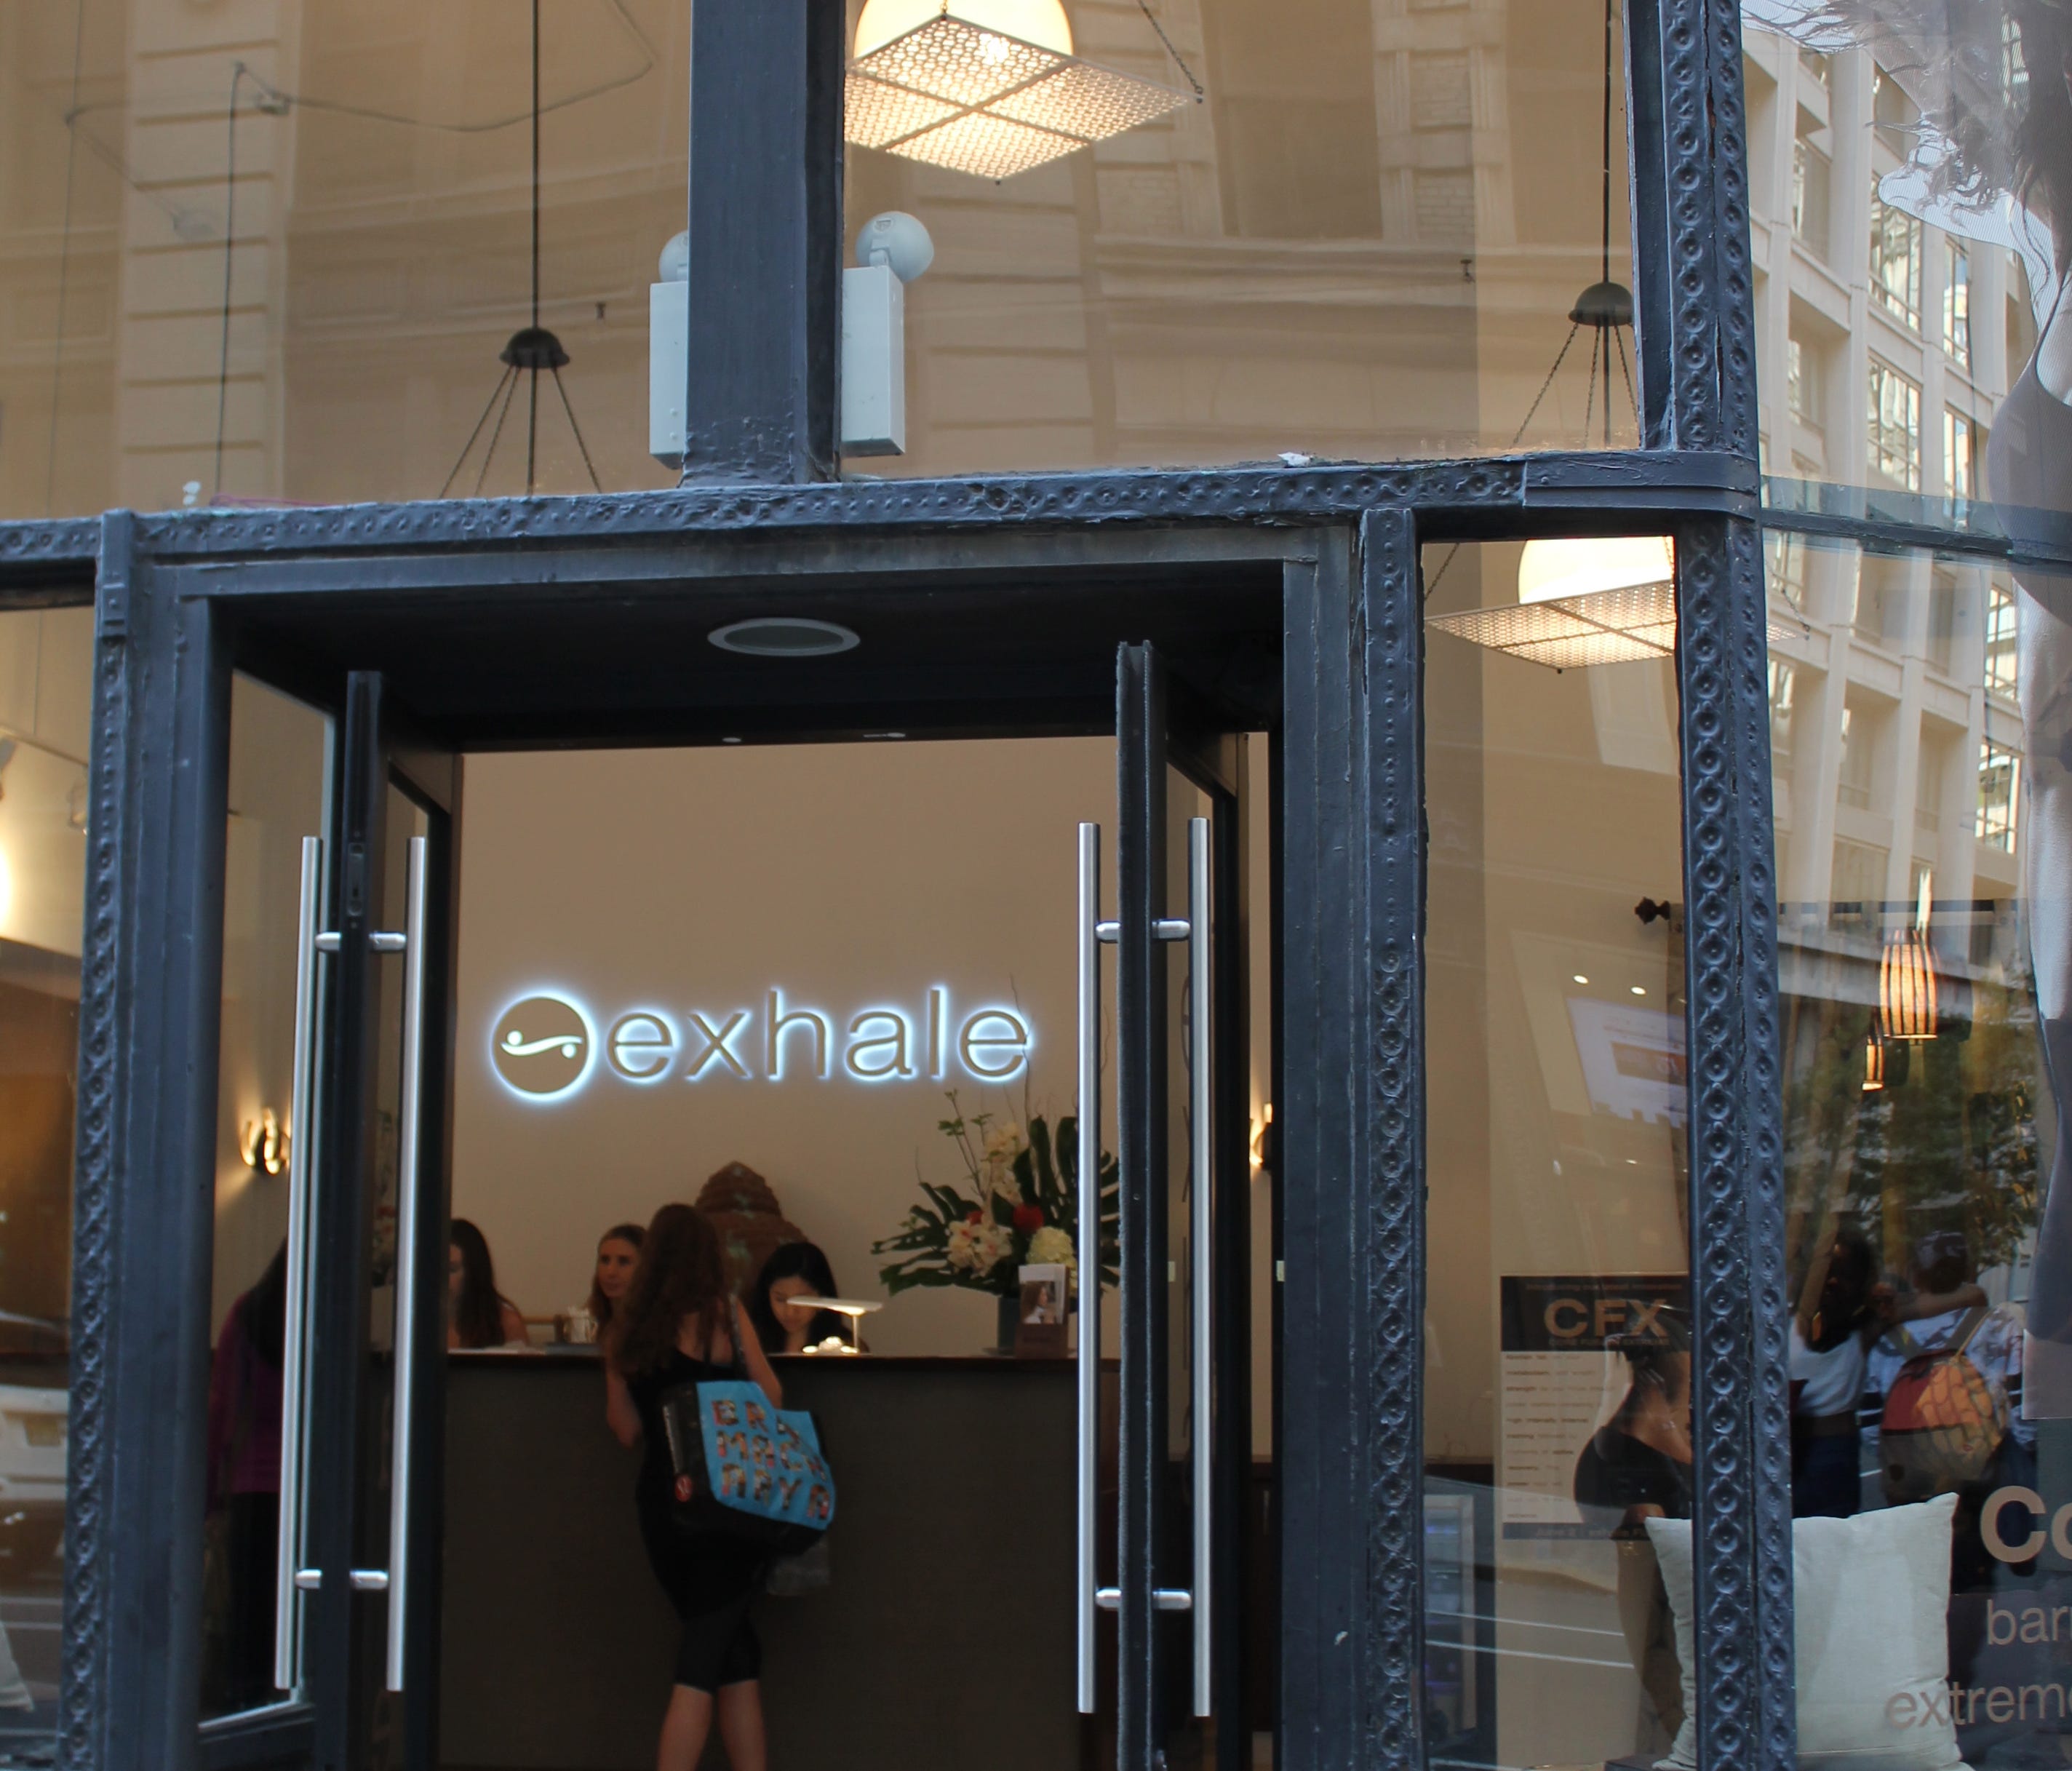 Hyatt Hotels has acquired the exhale spa brand.